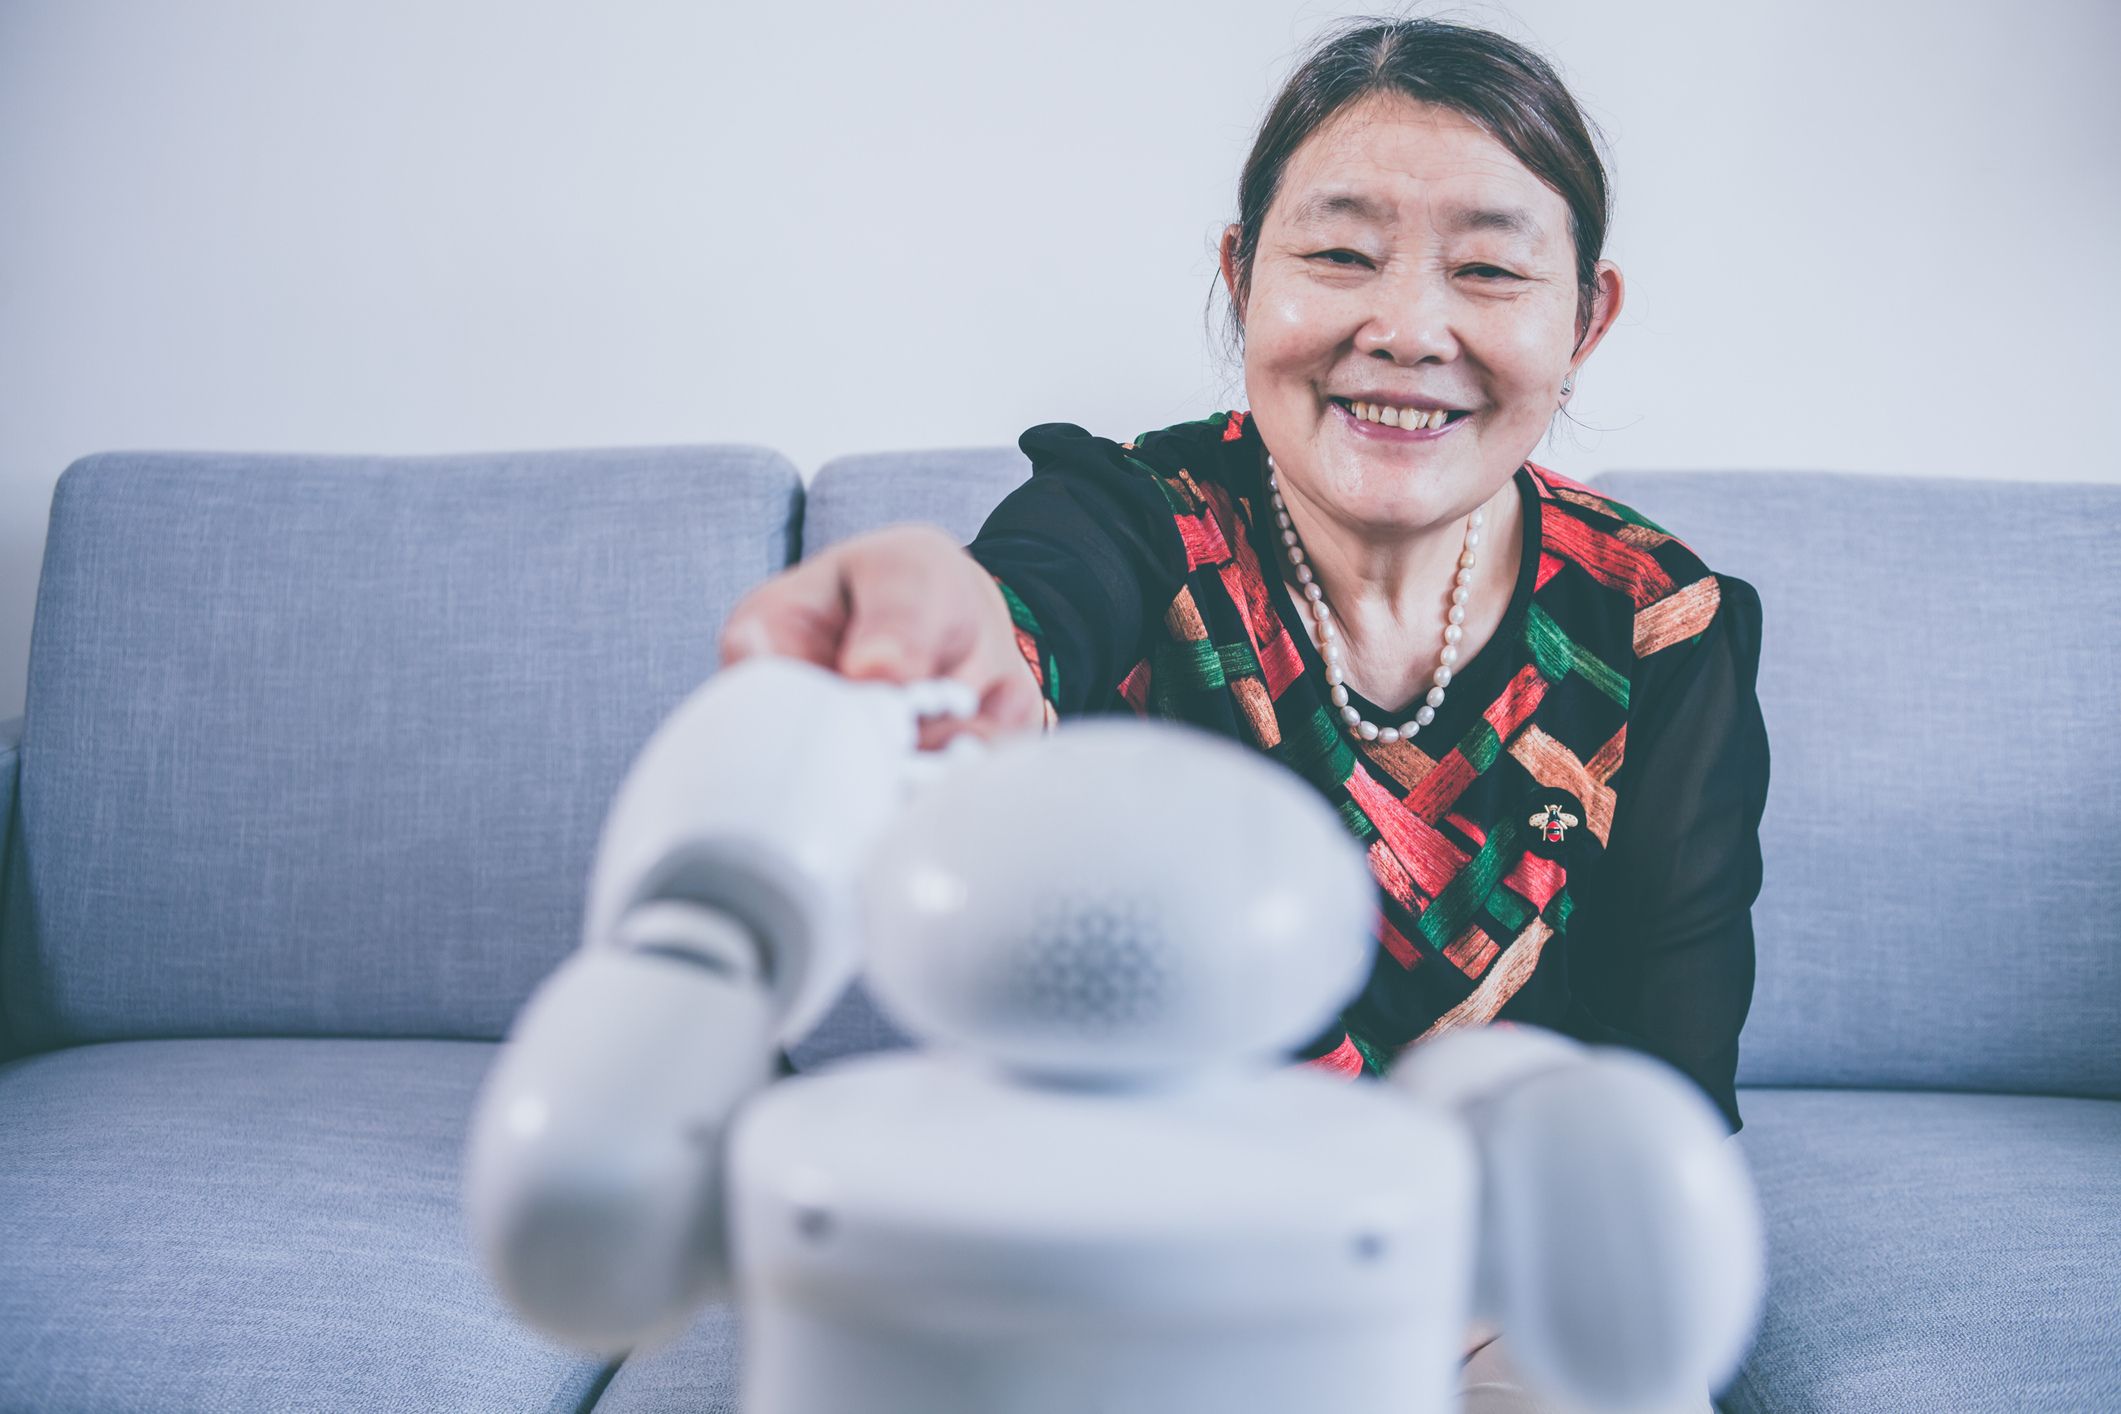 Could Robot Carers Bring Joy To lonely Seniors?